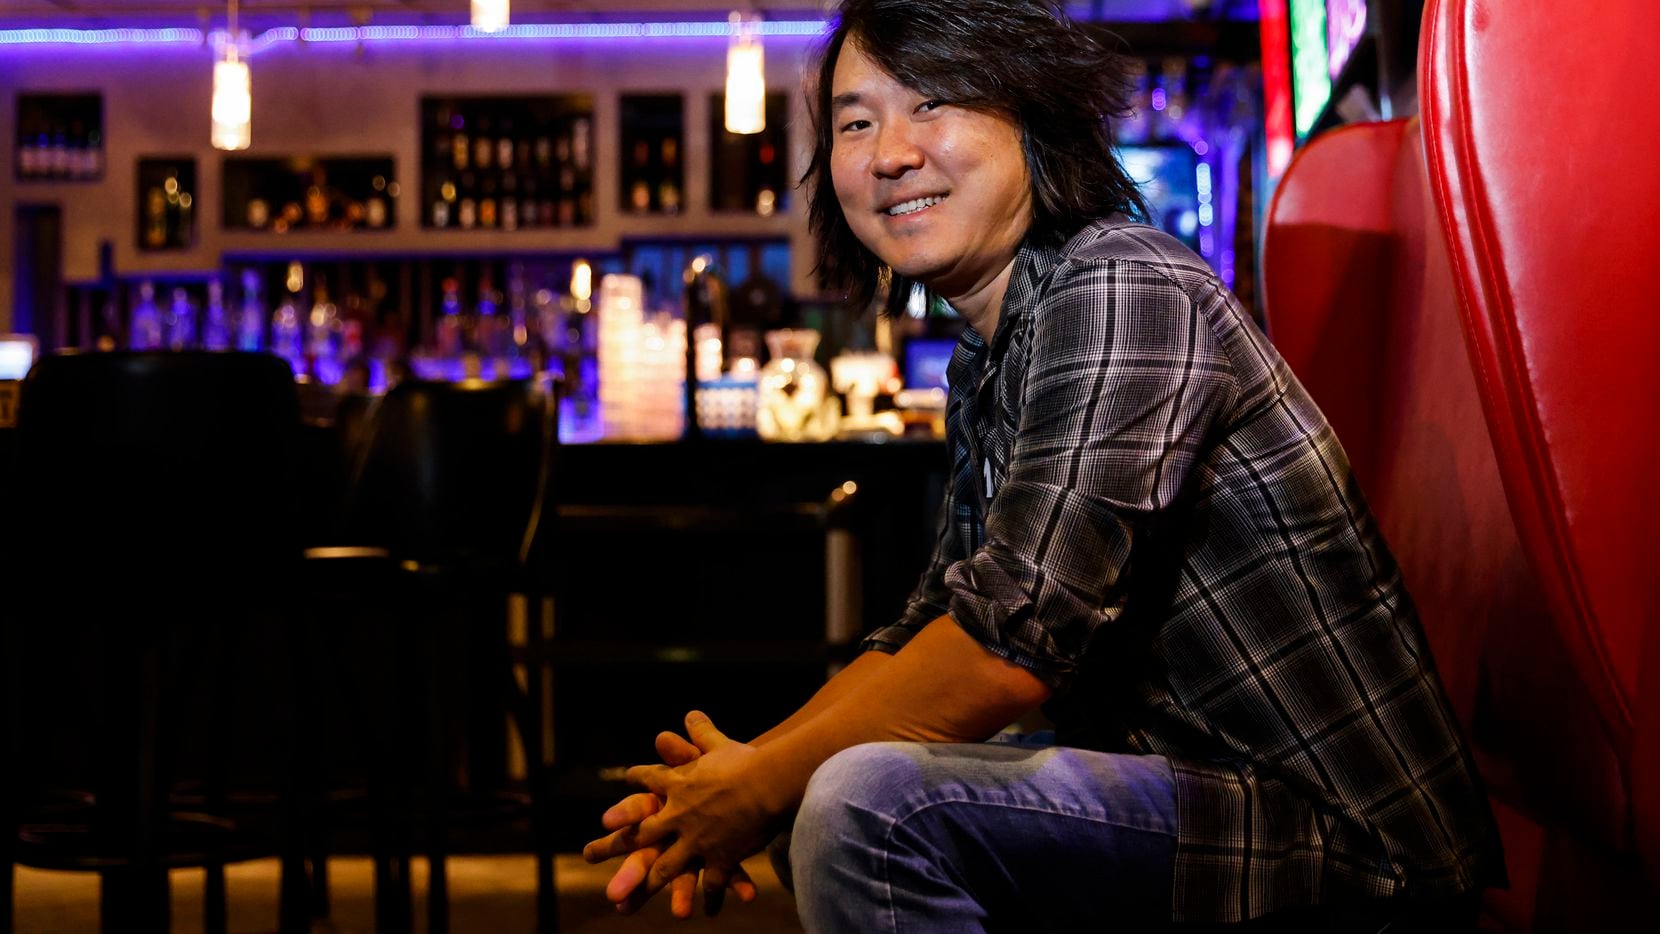 Encore Family Karaoke owner Jin Shin posed for a portrait at the Dallas business in May.